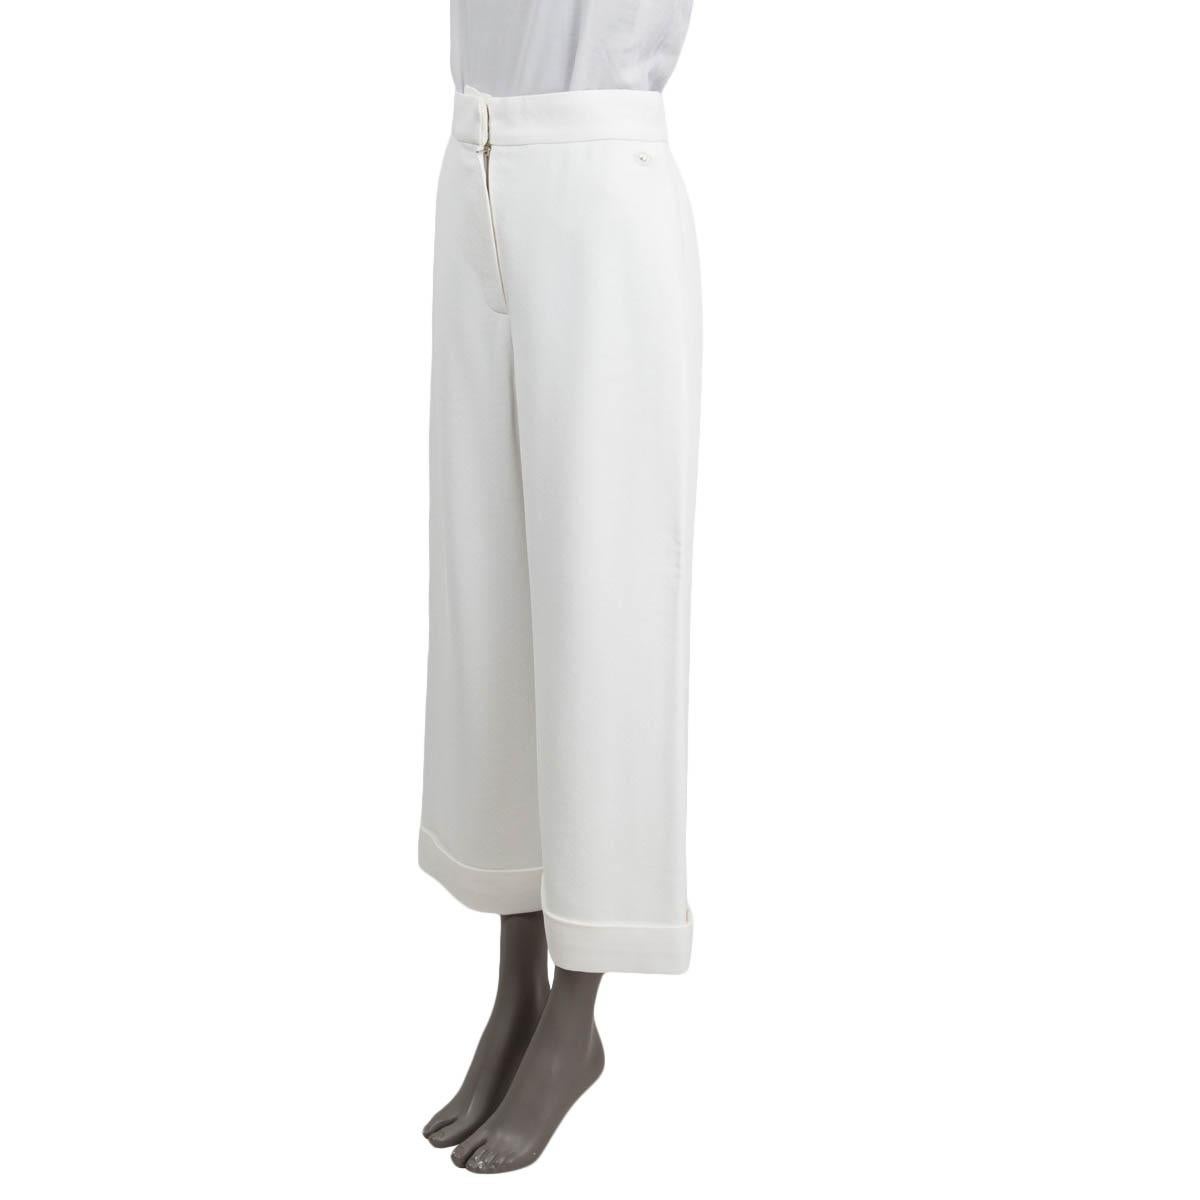 100% authentic Chanel cropped crepe pants in white rayon (100%). Features a wide-leg with one concealed zipper and two hooks on the front and a tiny button on the side. Lined in silk (100%). Have been worn and are in excellent condition. 

2017